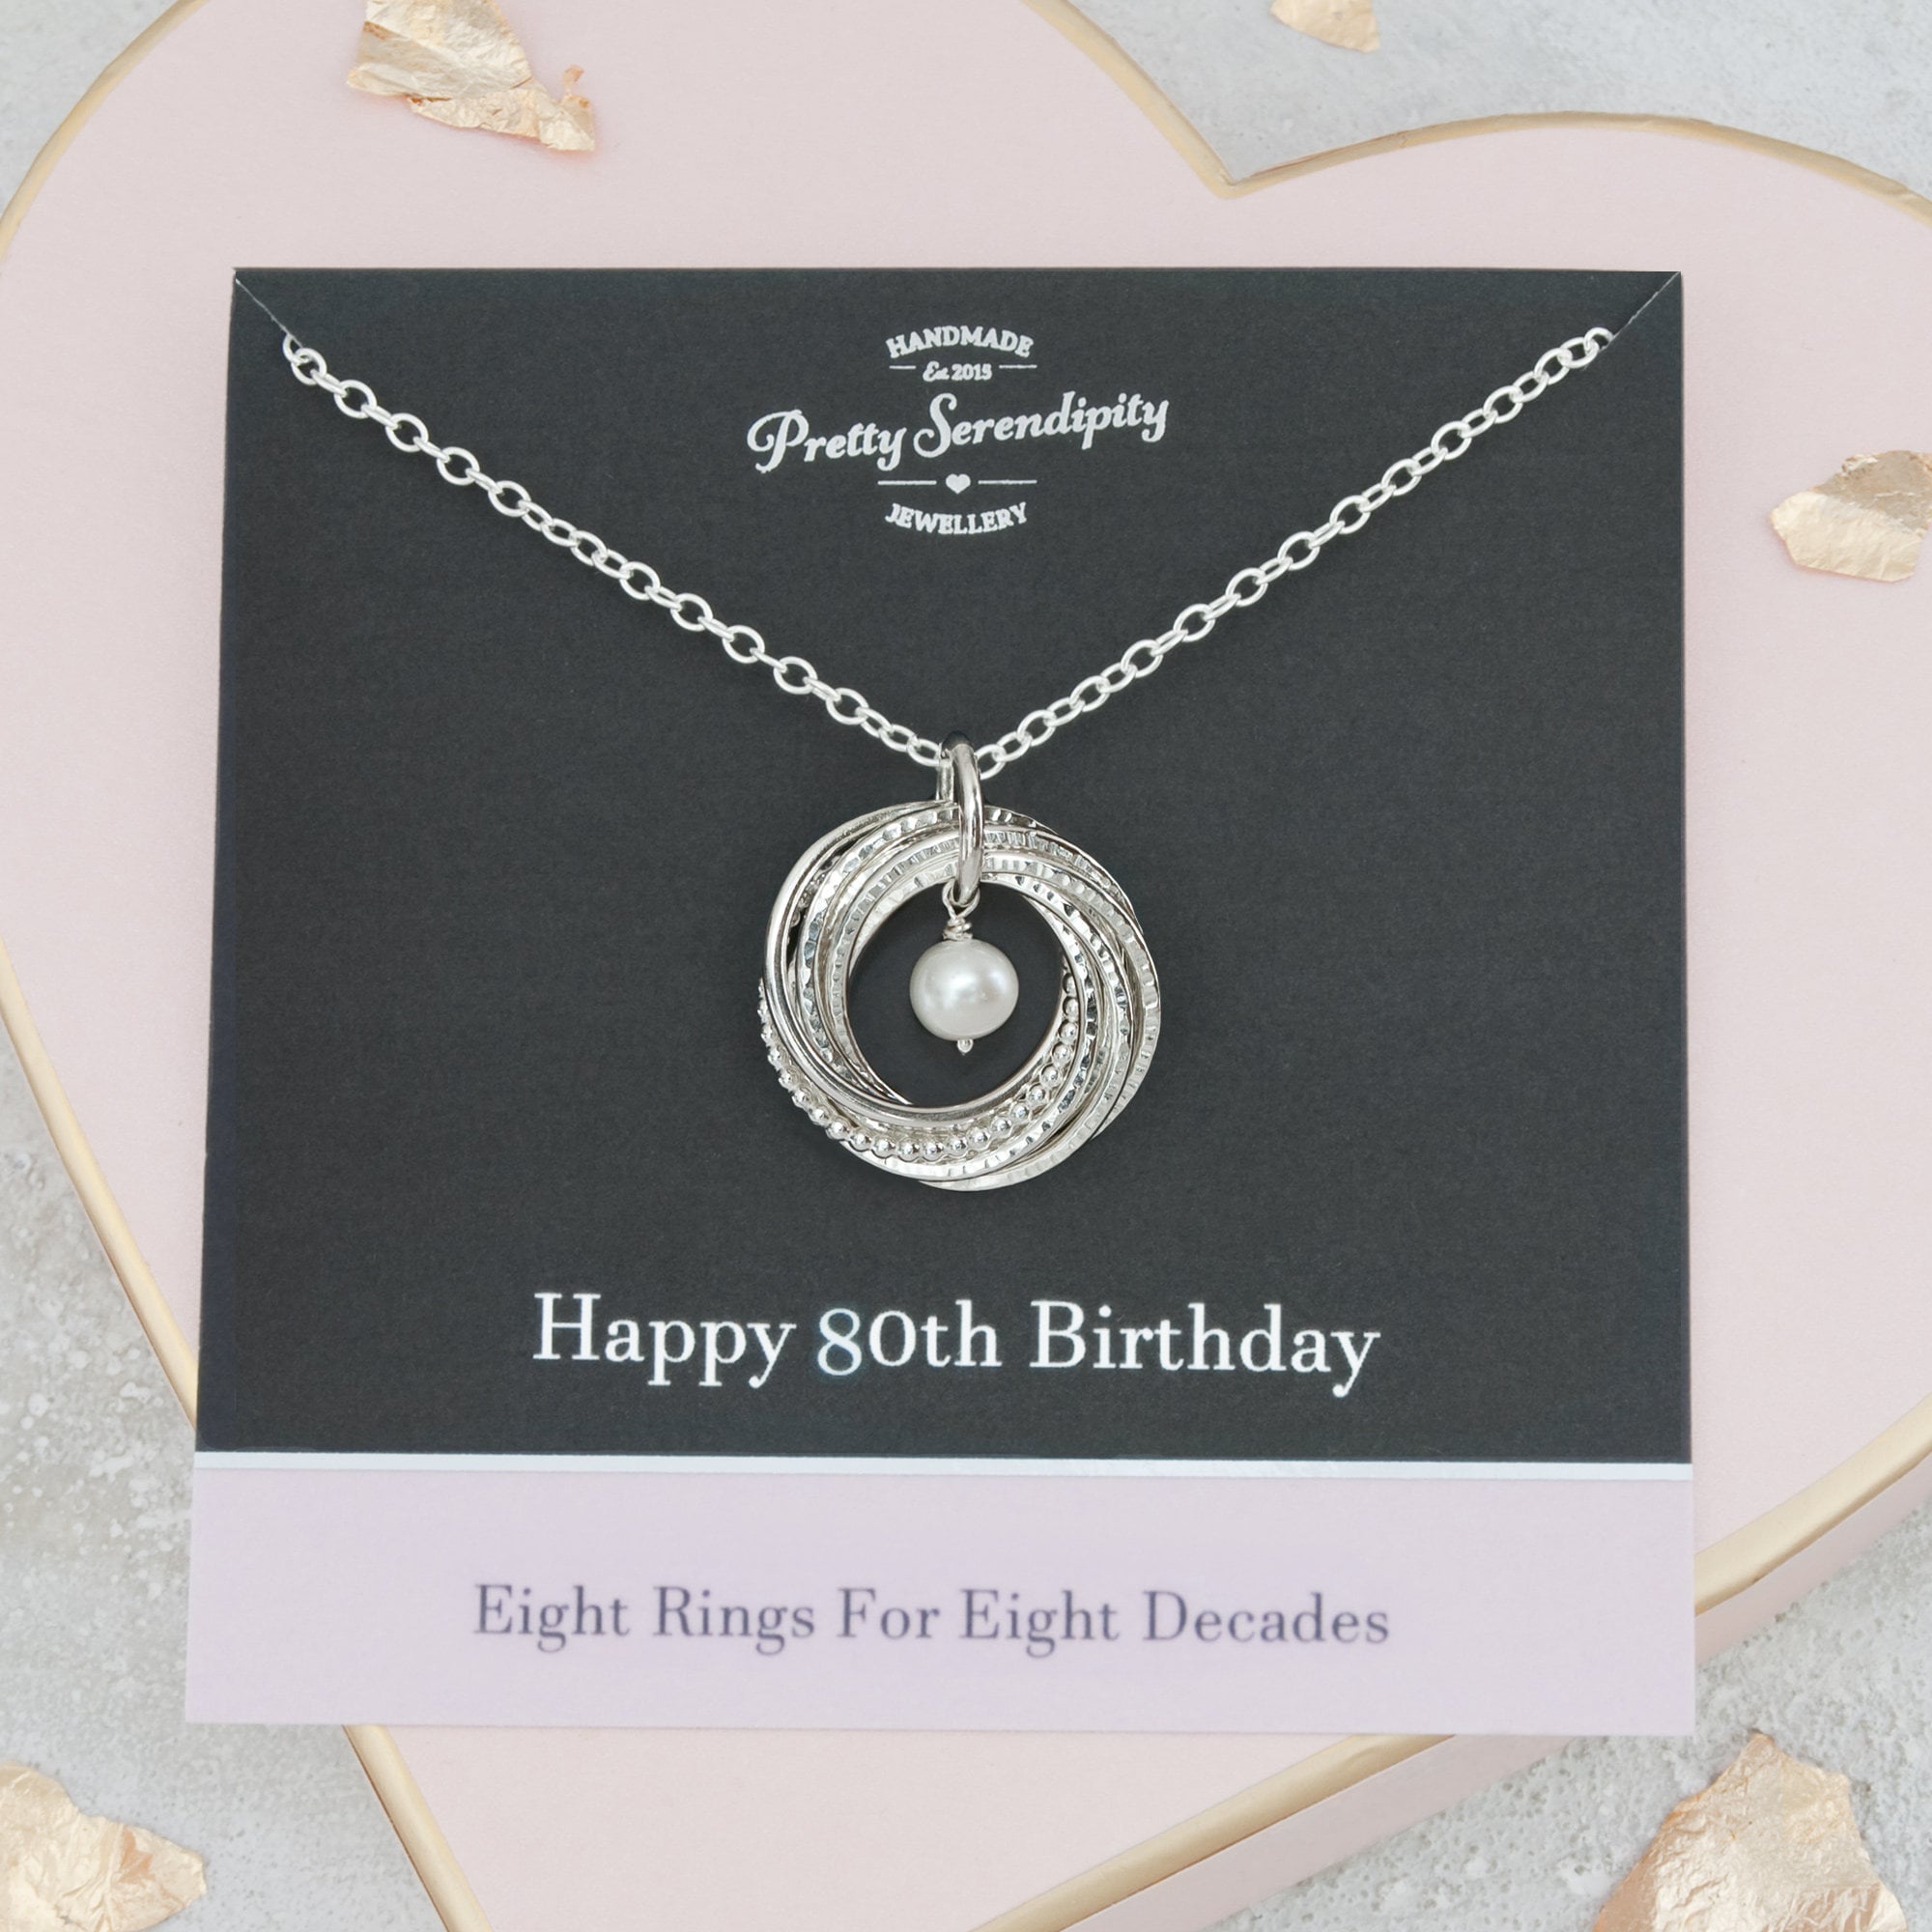 80Th Birthday Birthstone Necklace - Textured Sterling Silver, 8 Rings For Decades, Gift Her